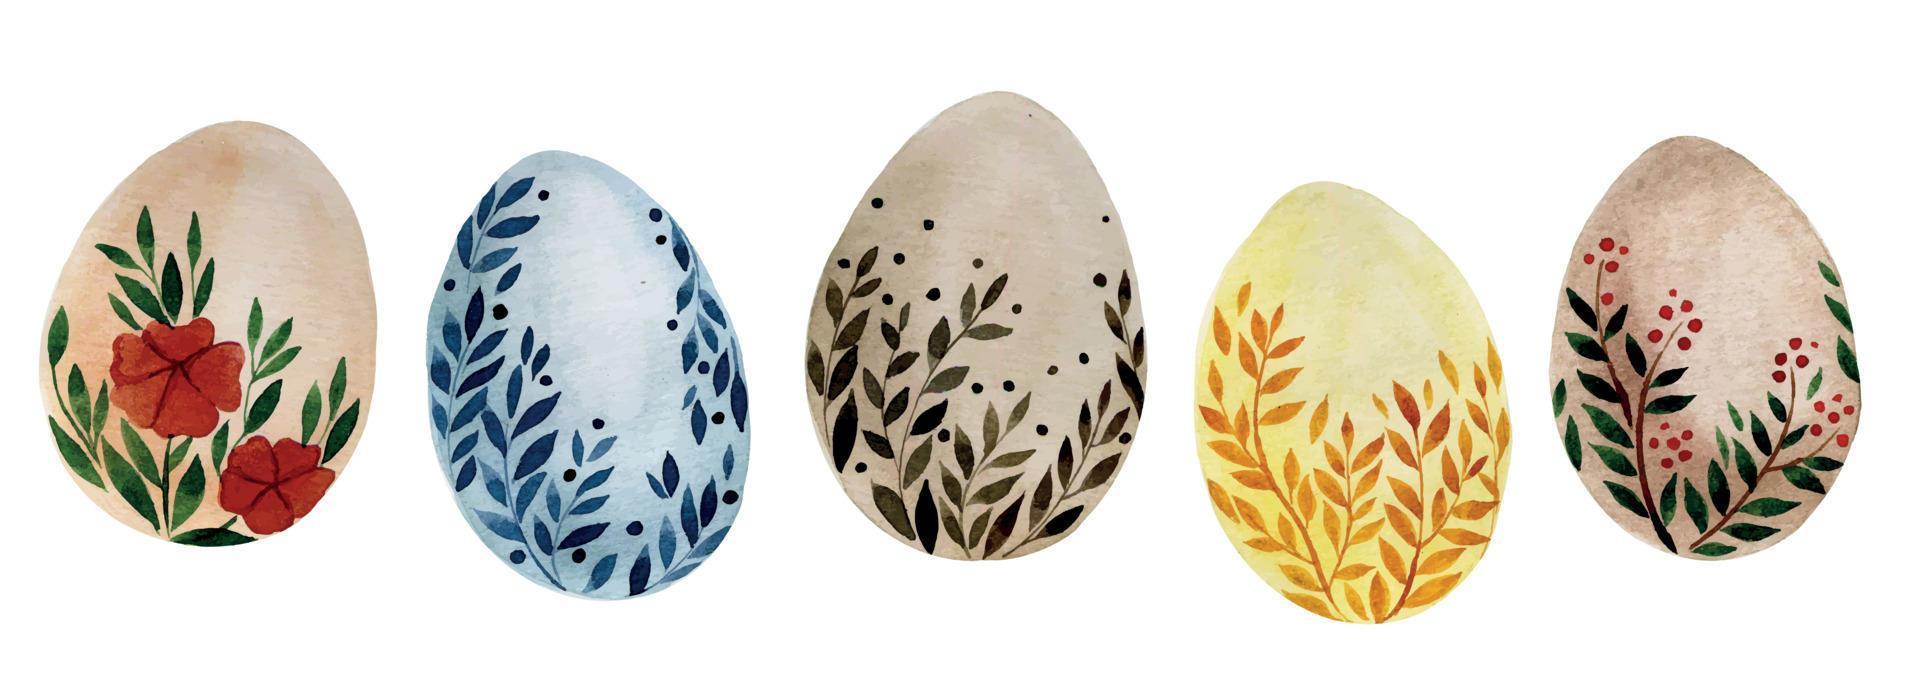 watercolor drawing by hands. set of Easter eggs. cute set with colored eggs with drawings of leaves and flowers. natural colors, boho style vector